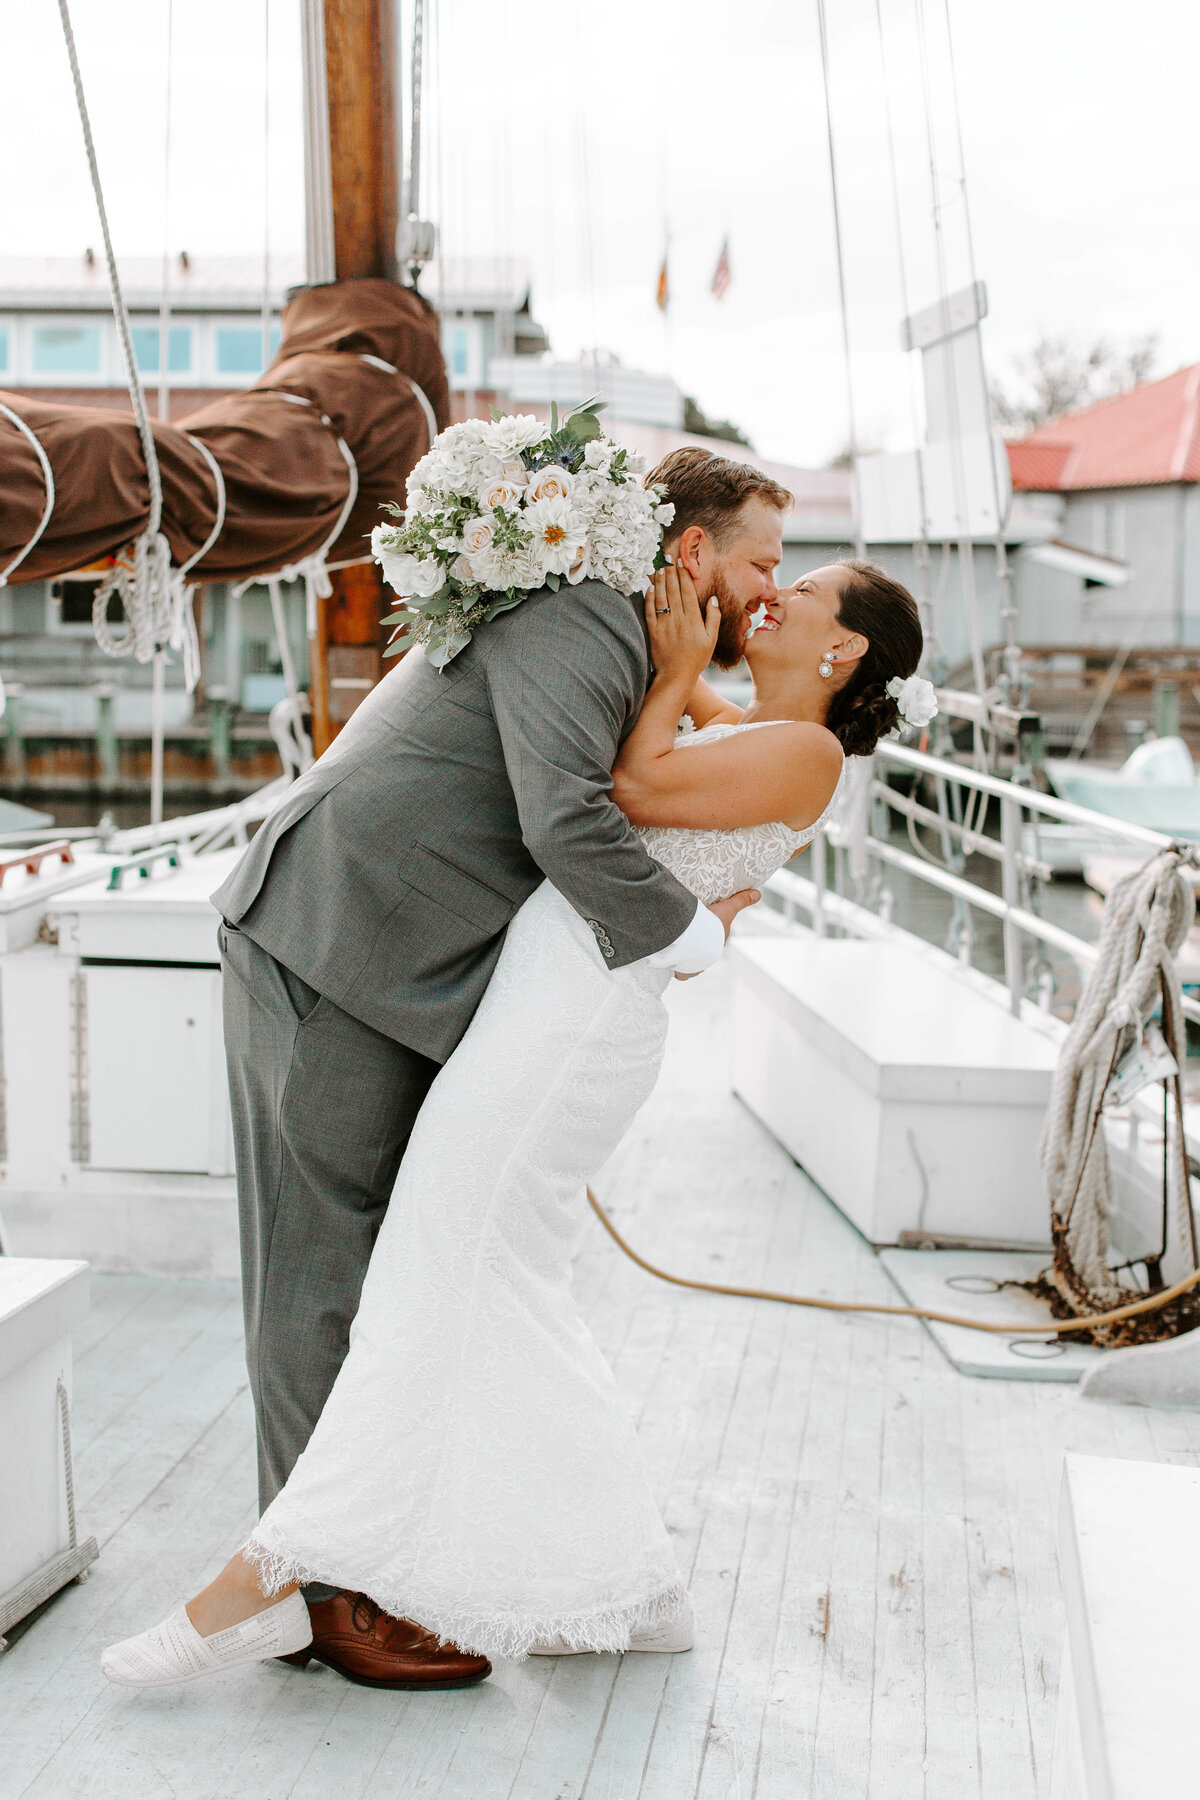 A bride and groom on a boat, about to kiss while the groom dips the bride back and they smile at eachother